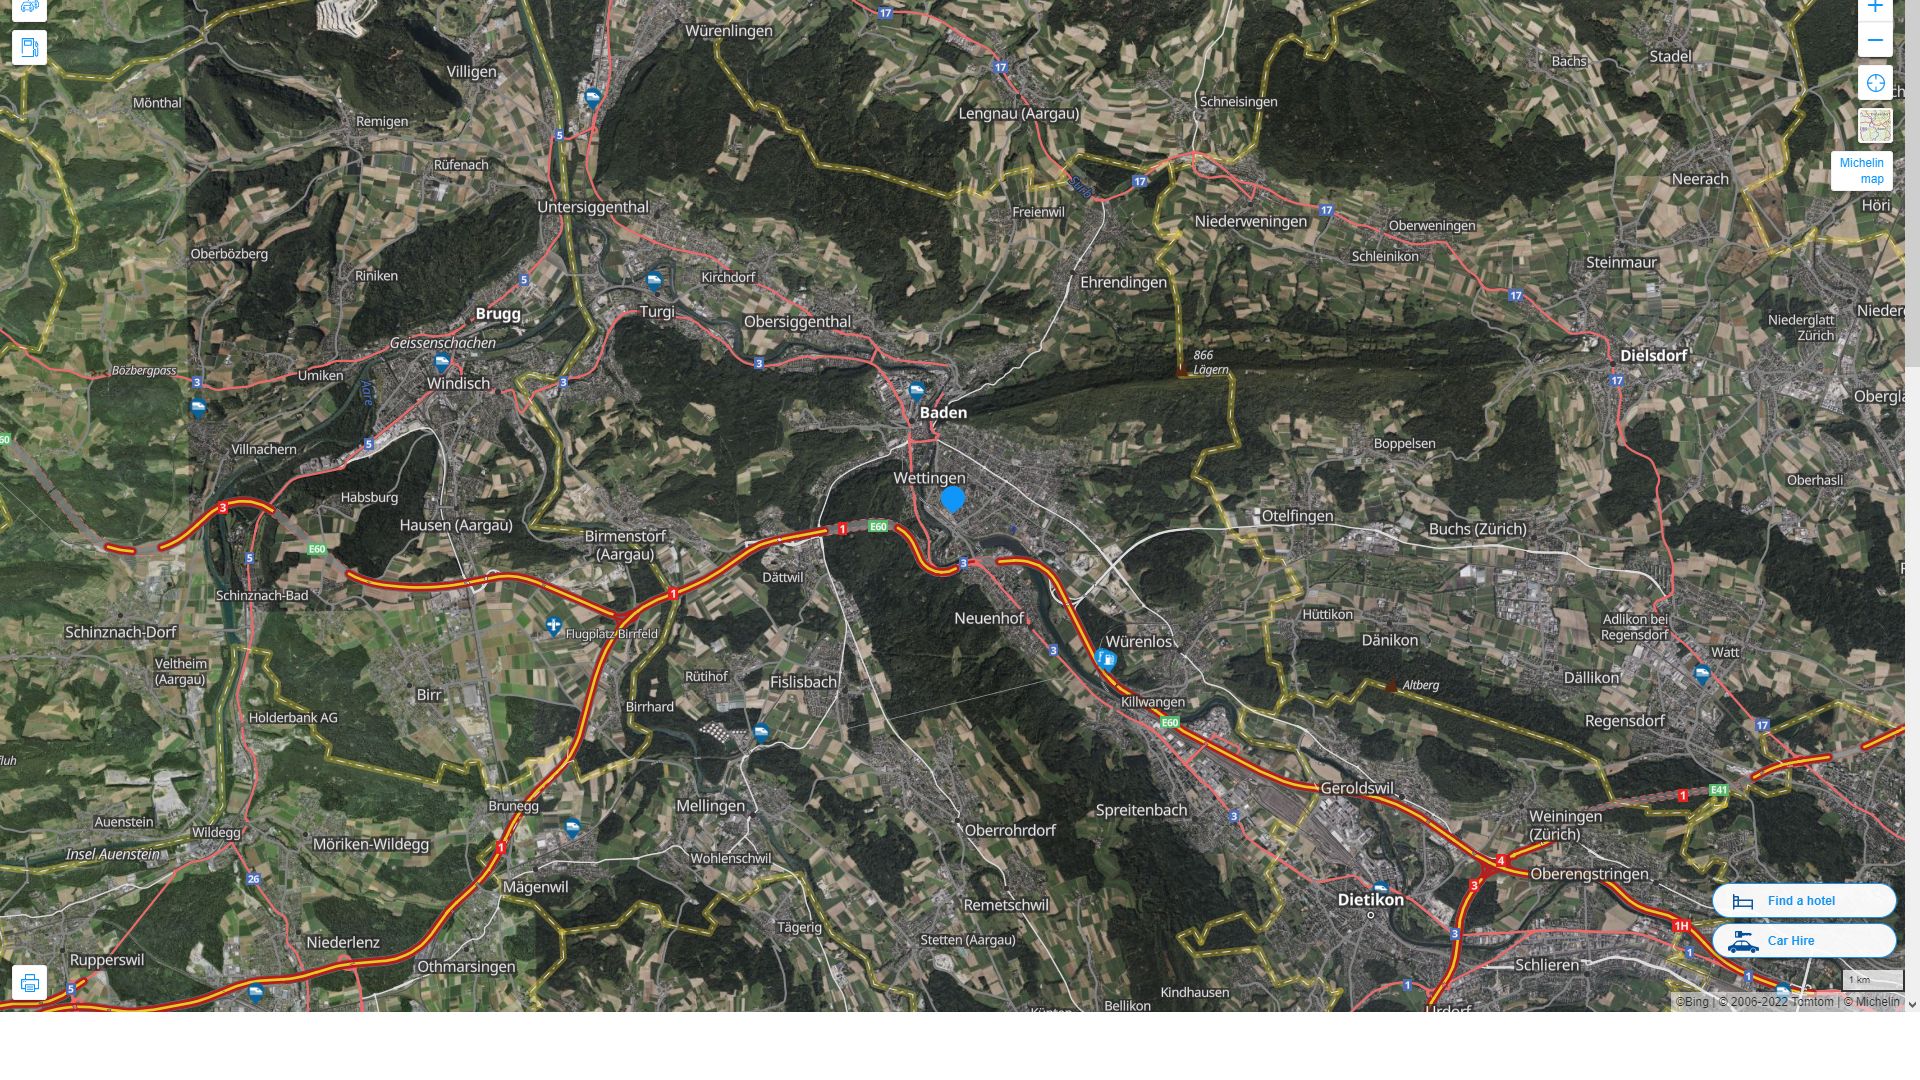 Wettingen Highway and Road Map with Satellite View